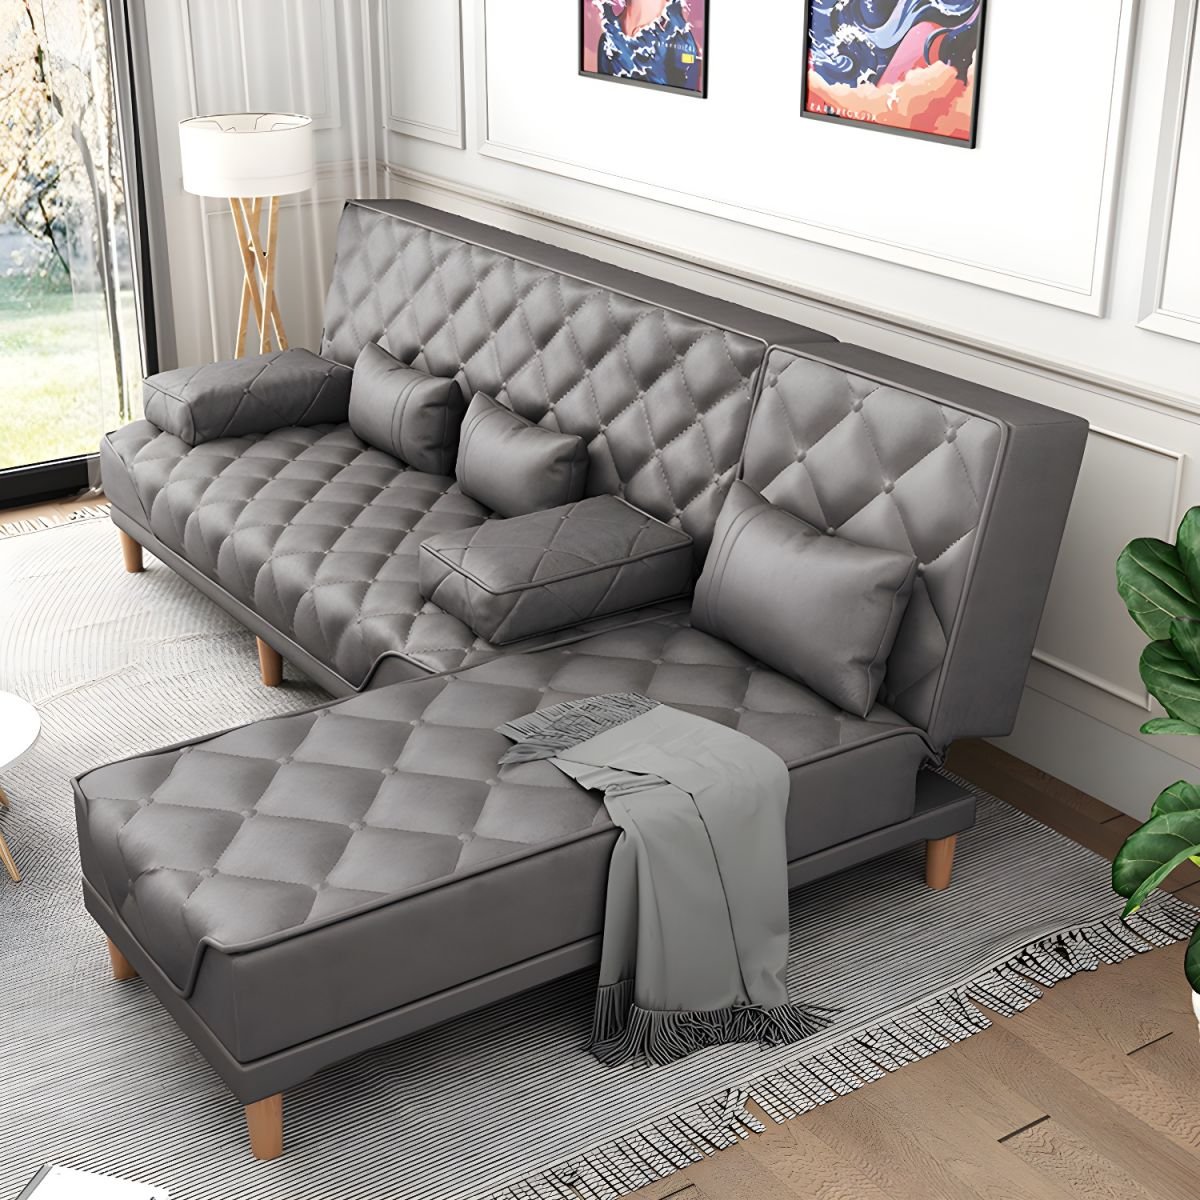 Contemporary Tight Back Convertible Sofa and Chaise with Pillow Top Arm - 73"L x 57"W x 34"H Dark Gray Tech Cloth